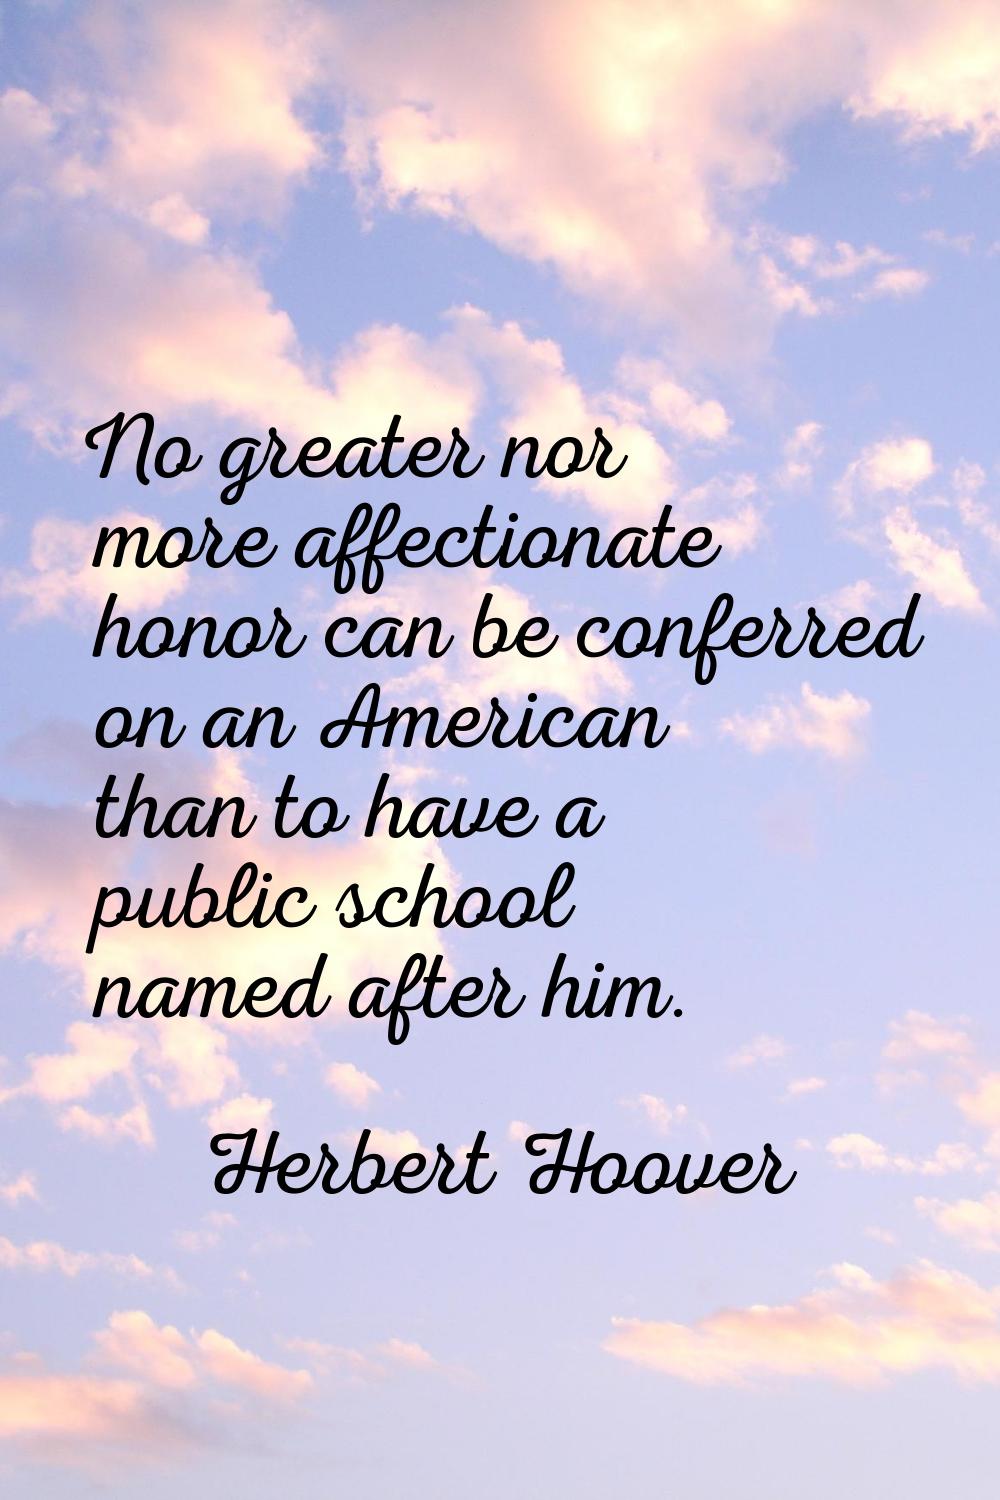 No greater nor more affectionate honor can be conferred on an American than to have a public school